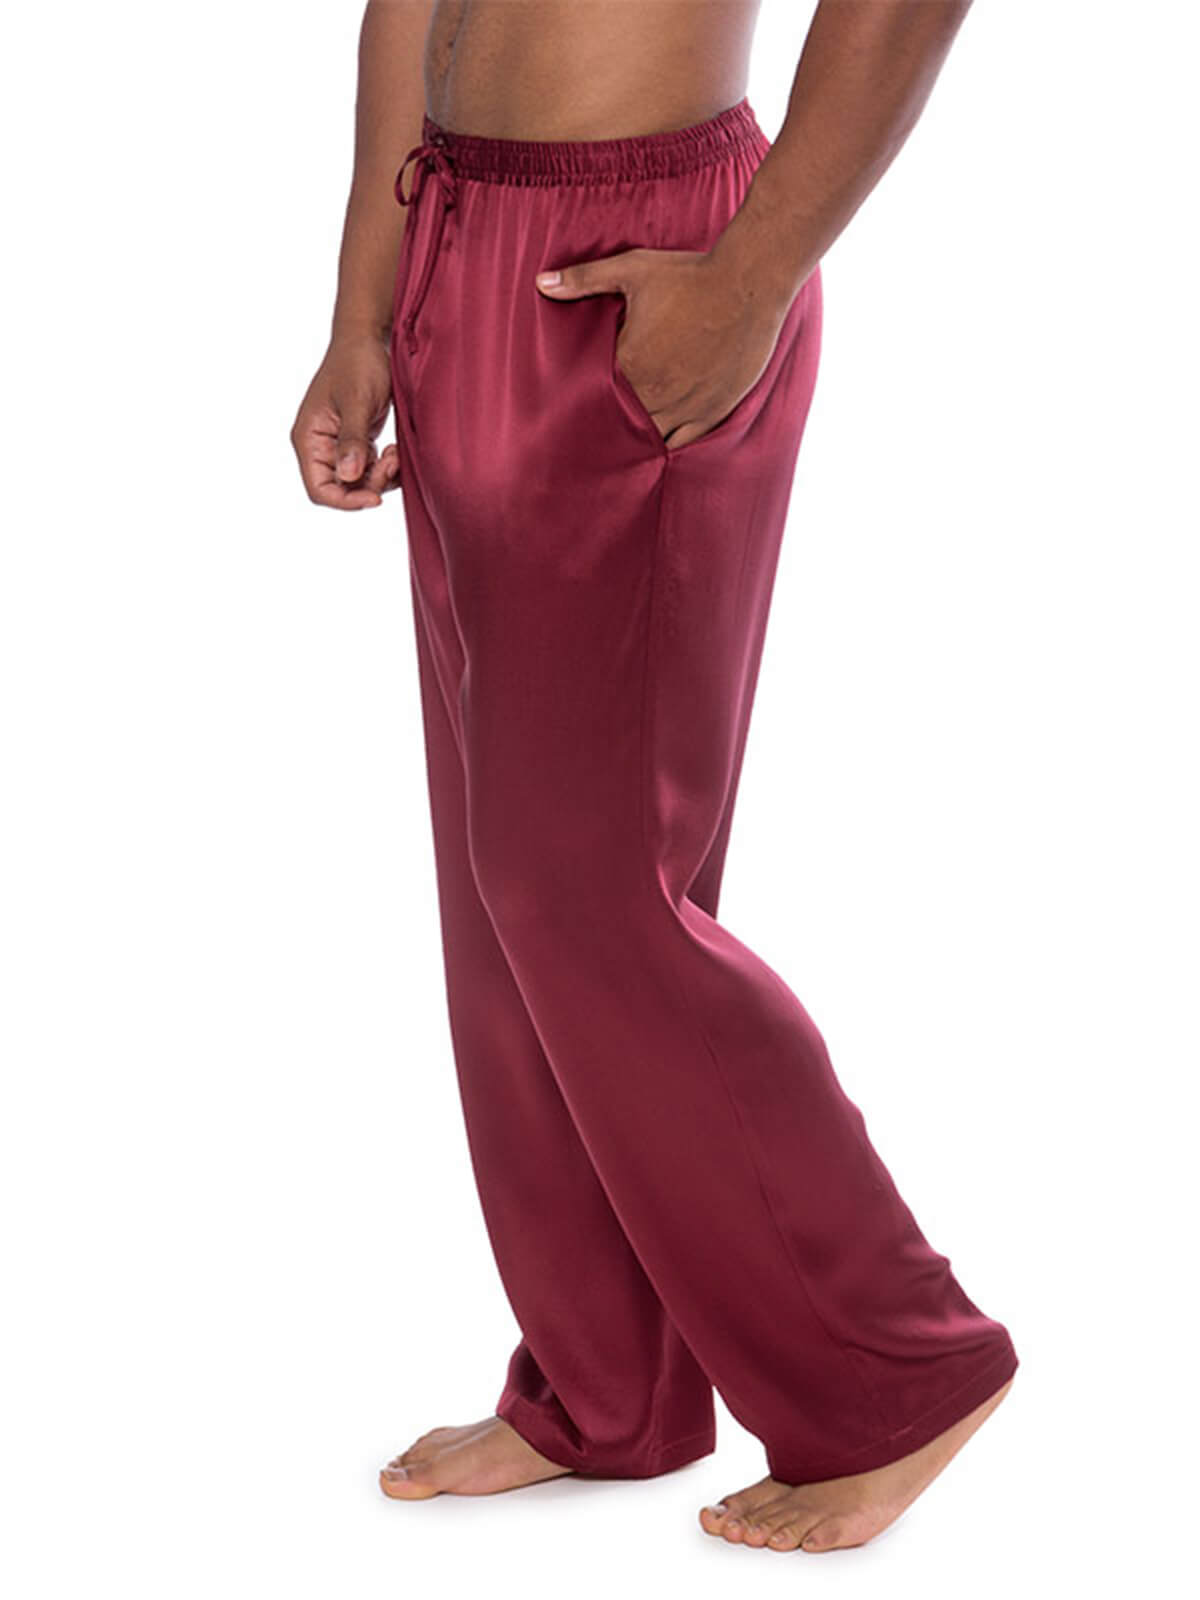 19 Momme Mens Comfortable Long Silk Pajama Pants With Drawstring [FS025] -  $129.00 : FreedomSilk, Best Silk Pillowcases, Silk Sheets, Silk Pajamas For  Women, Silk Nightgowns Online Store